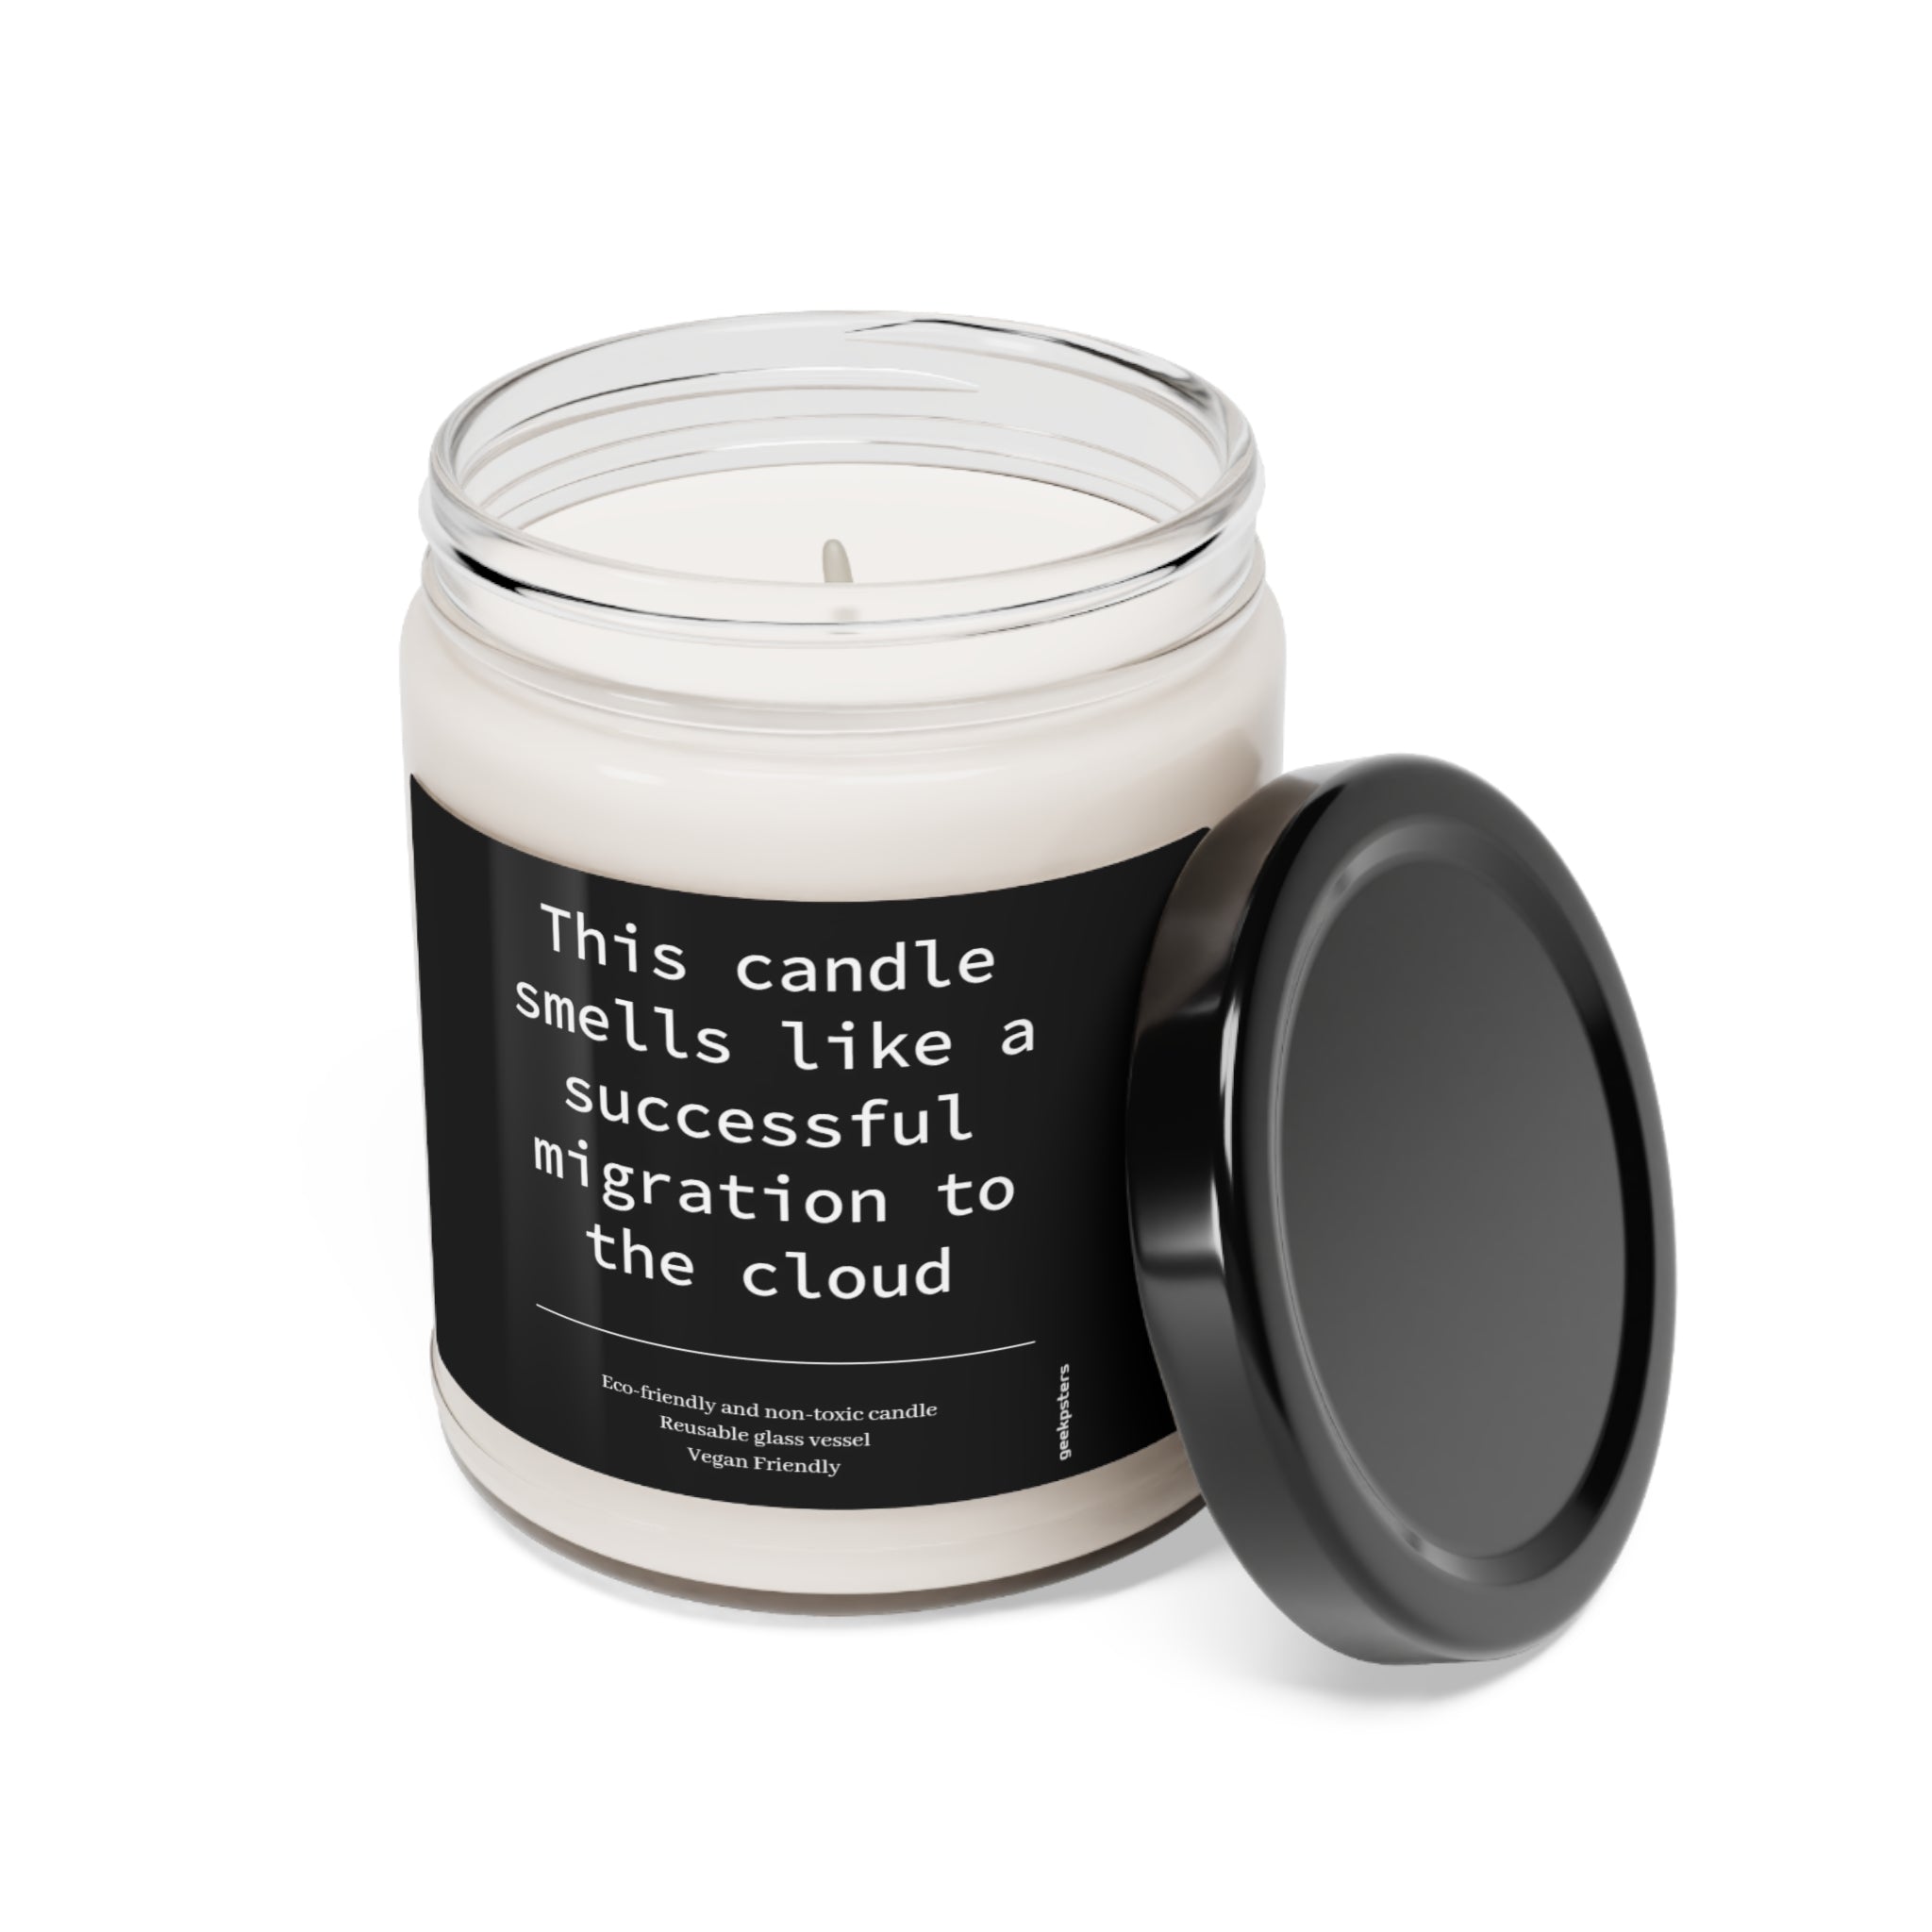 A **This candle smells like a successful migration to the cloud - Scented Soy Candle, 9oz** made from a natural soy wax blend, with the label "this candle smells like a successful migration to the cloud" against a white background.